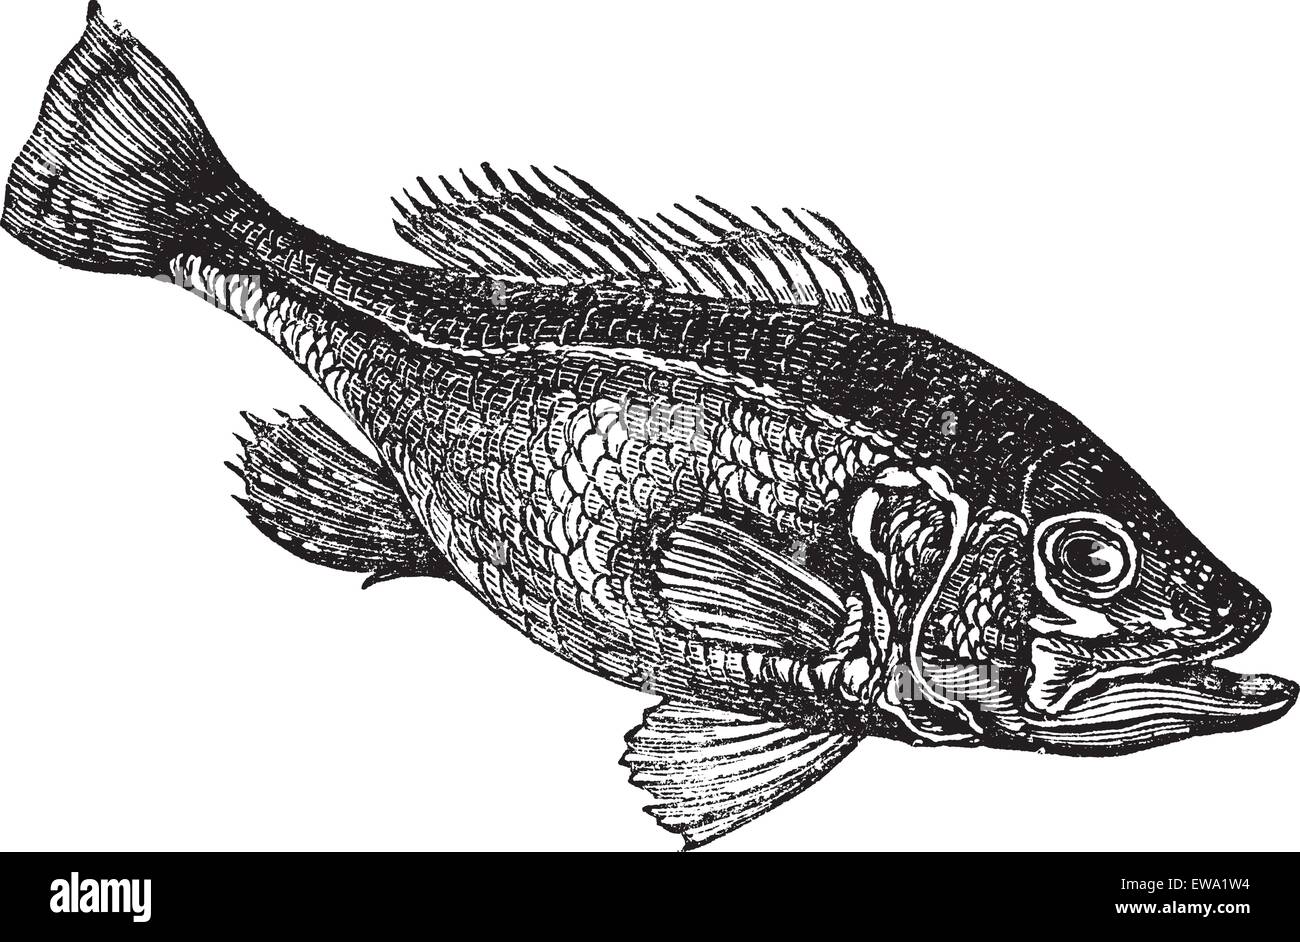 Largemouth bass (Micropterus salmoides) or widemouth bass or bigmouth or black bass or bucketmouth vintage engraving. Old engraved illustration of freshwater largemouth bass fish. Stock Vector